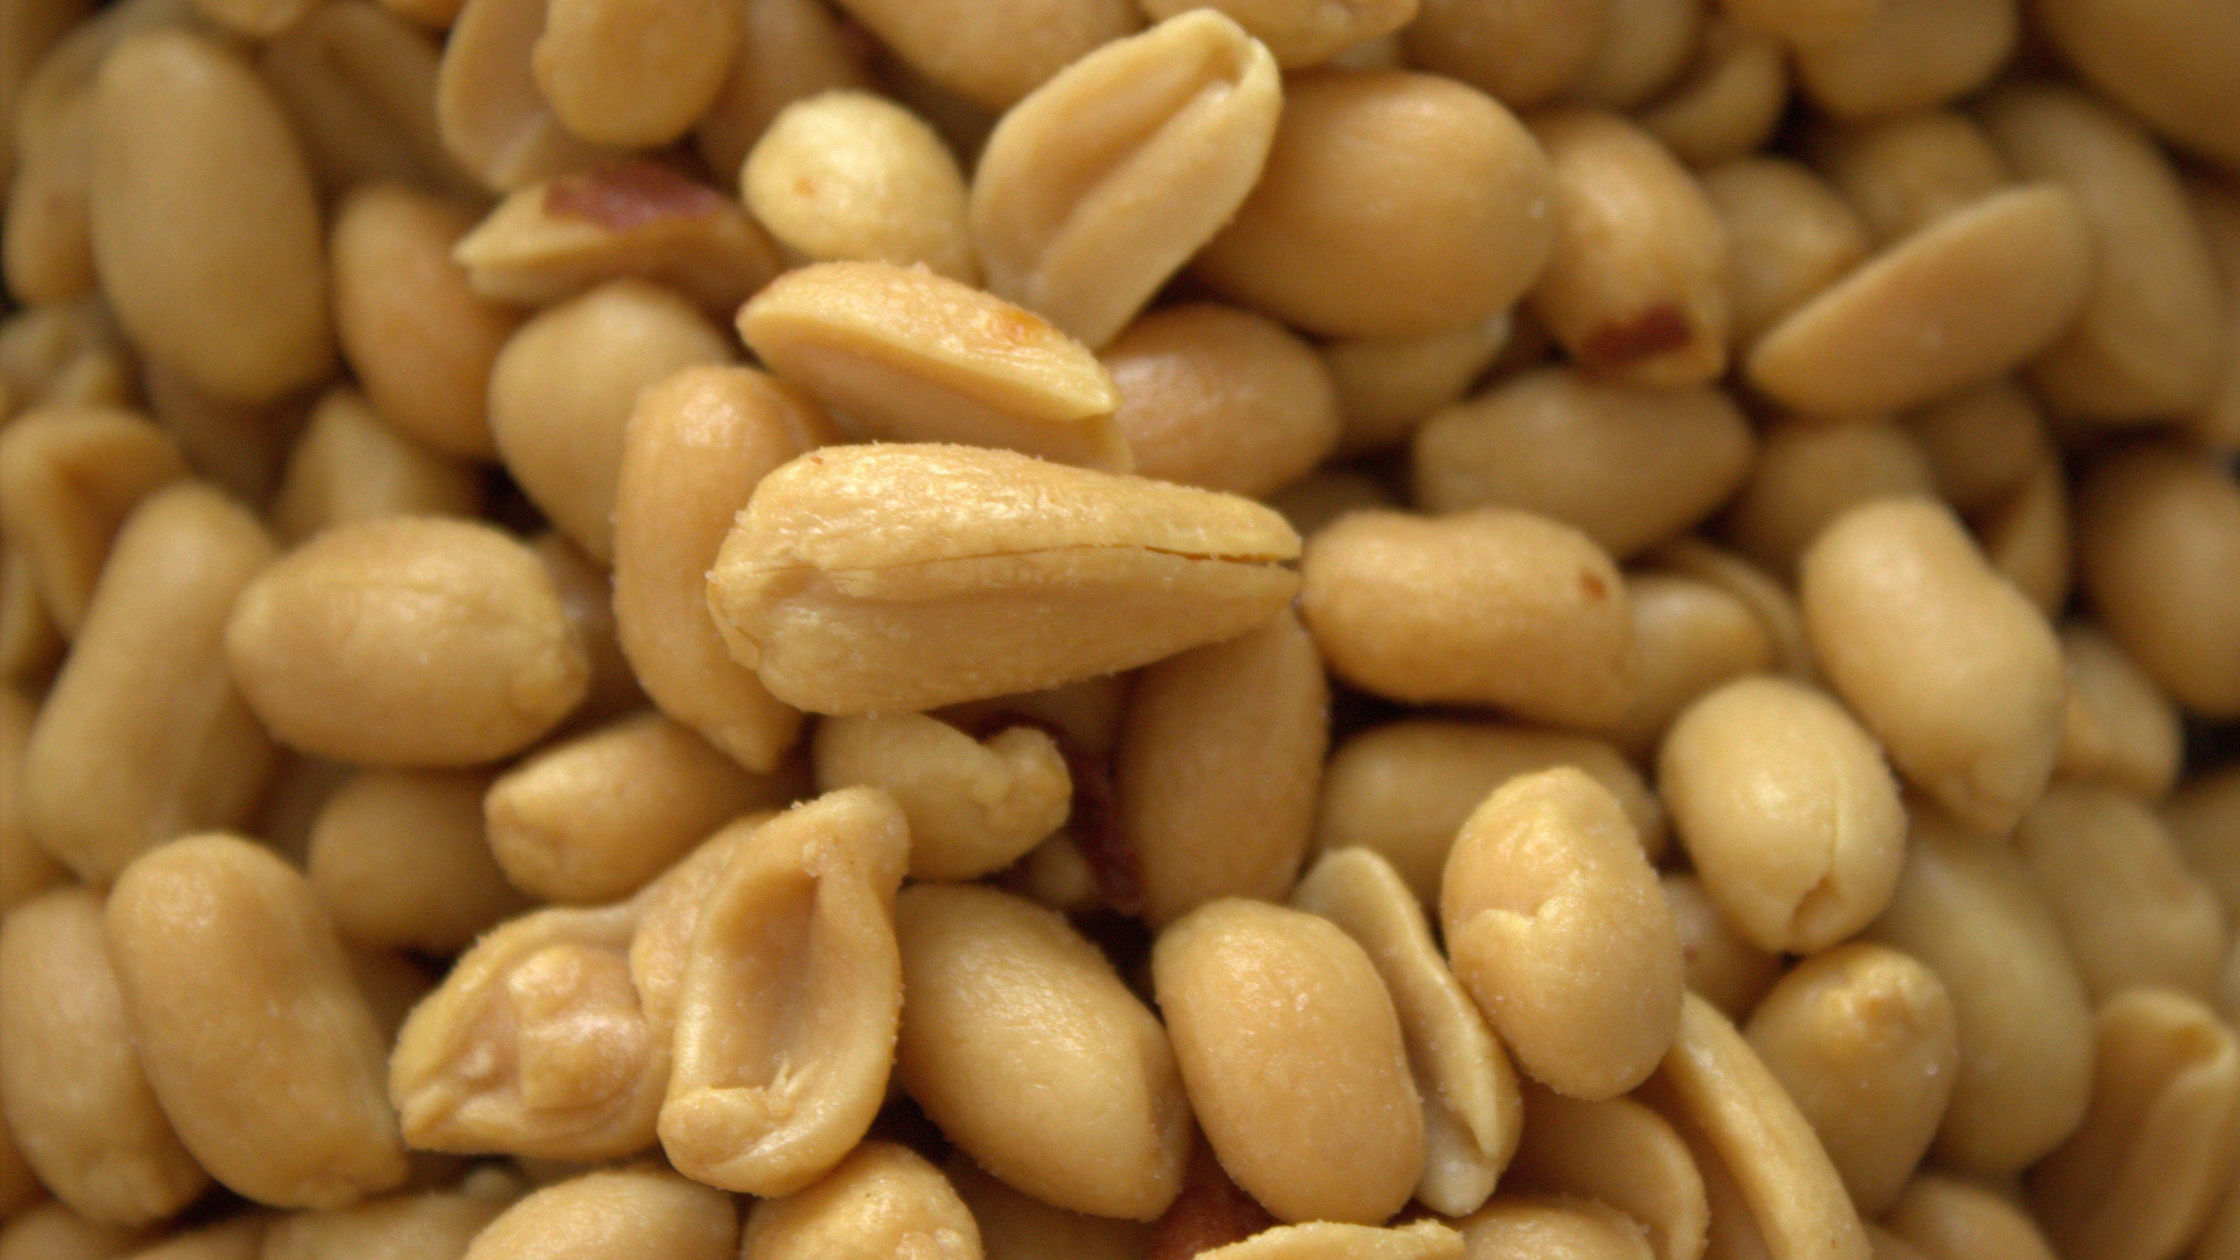 Discover the Amazing Health Benefits of Peanuts